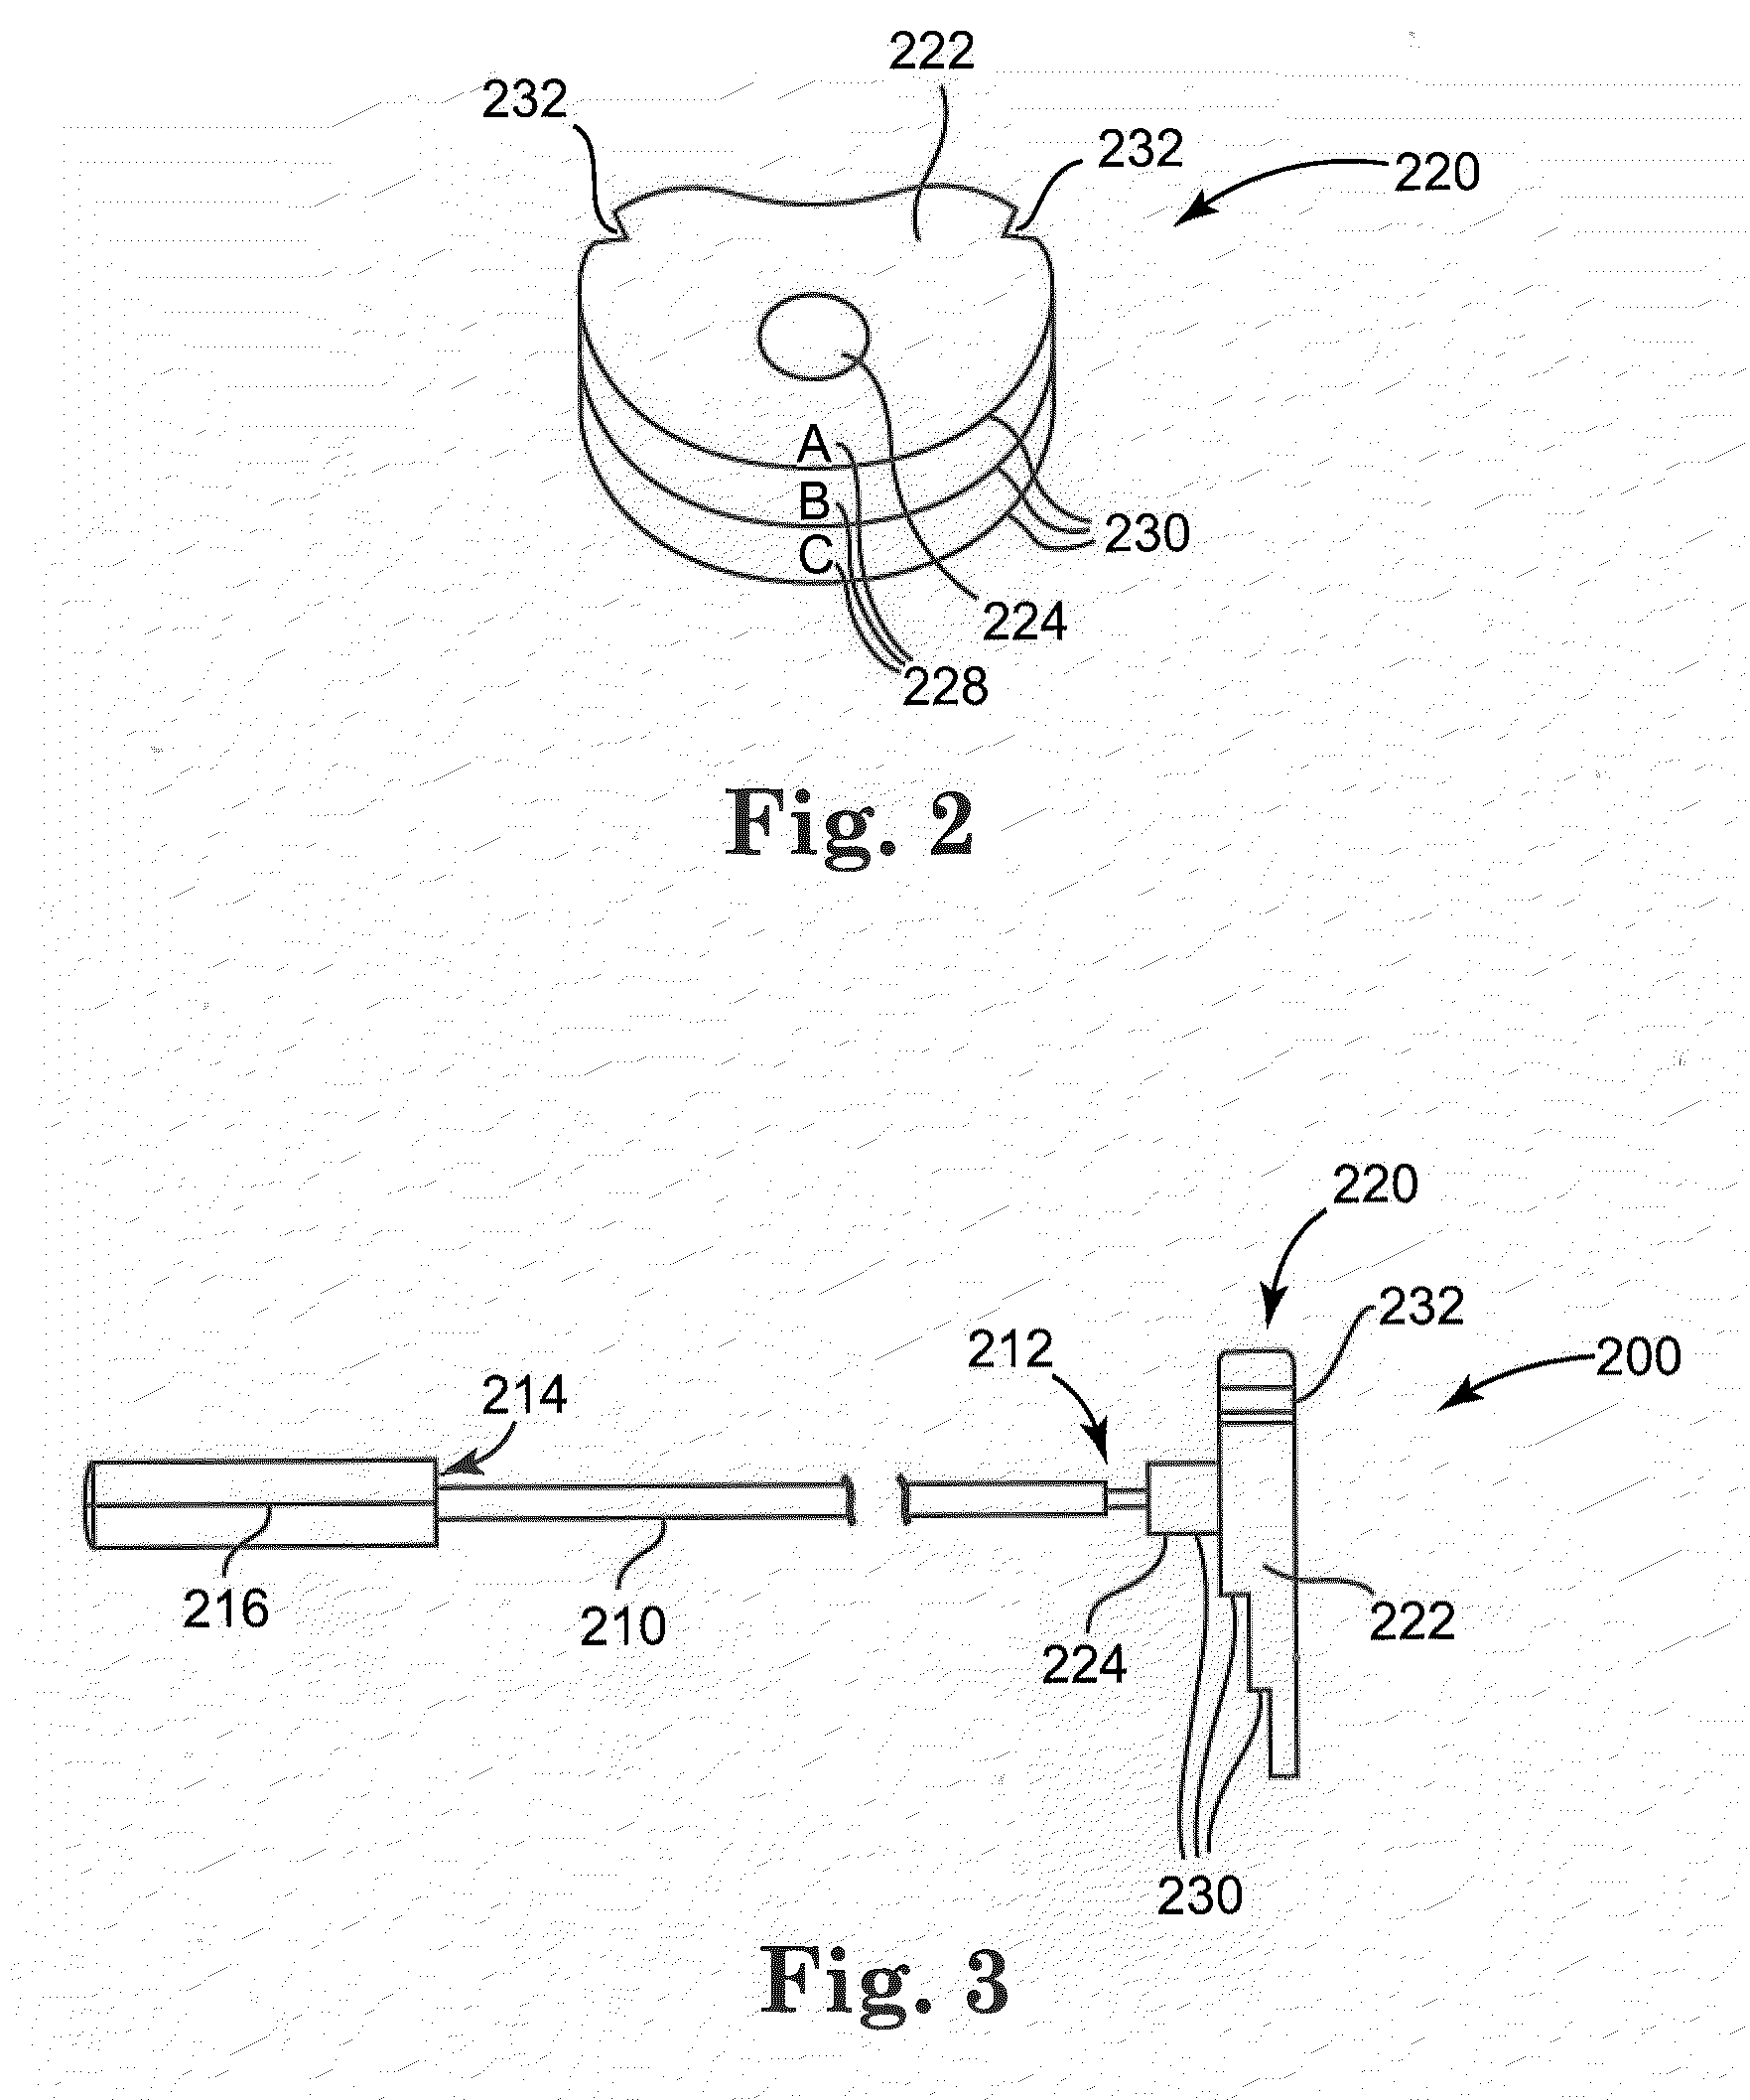 Sizer Device Having a Plurality of Anterior-Posterior Ratios